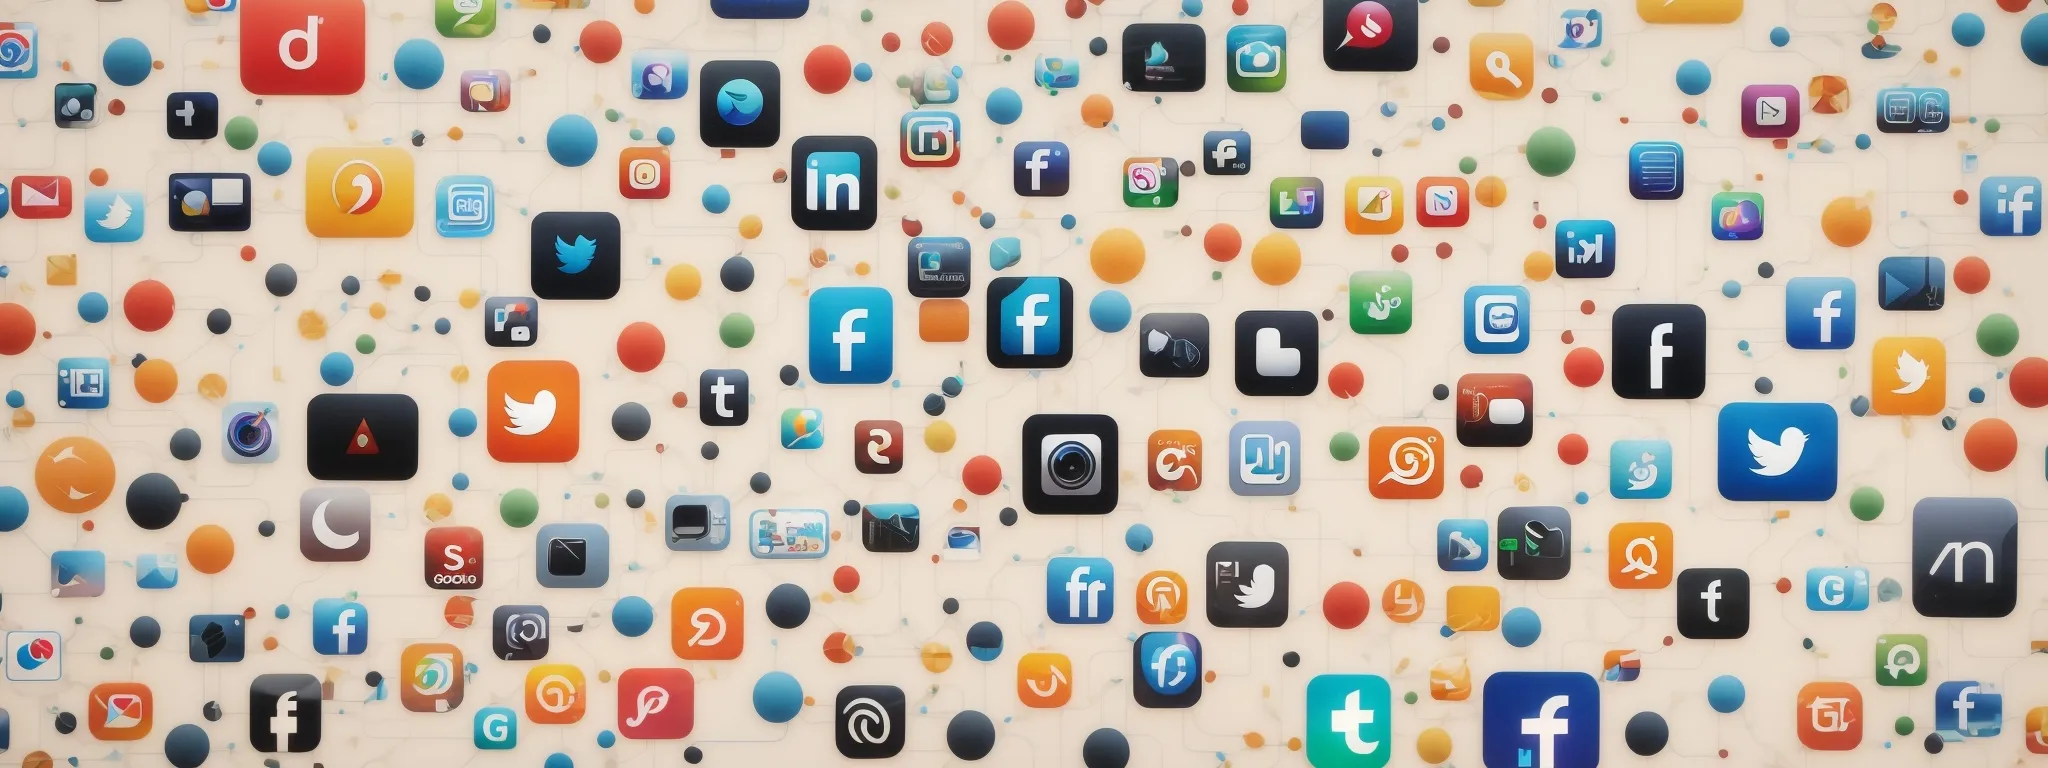 a collage of simplified icons representing different social media platforms interconnected with flow lines symbolizing networked communication.